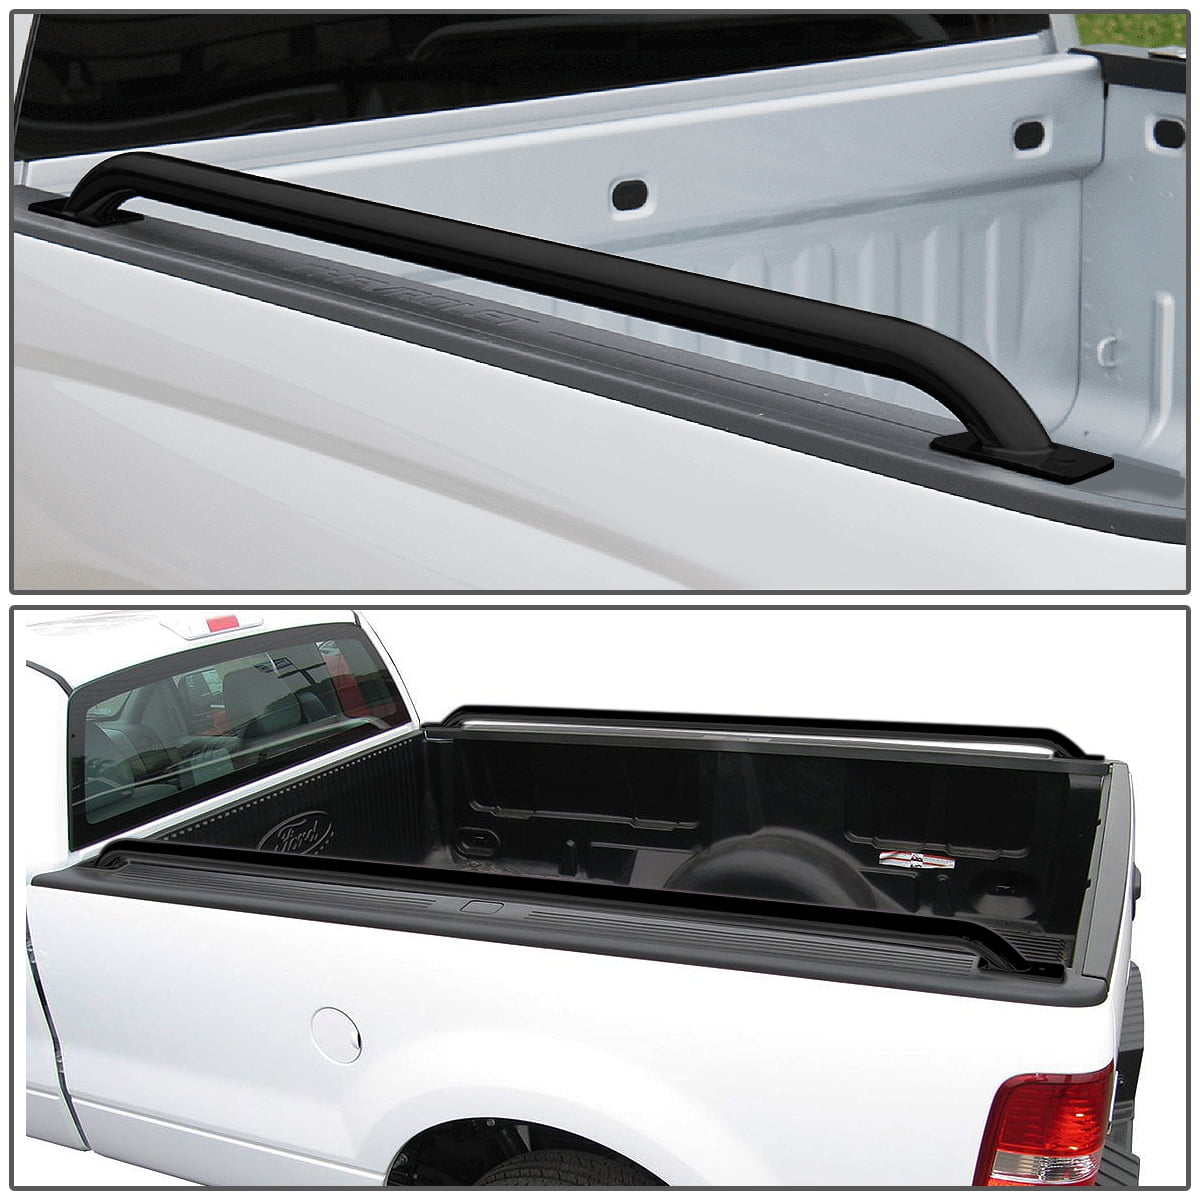 DNA MOTORING RAIL-005-SS Pair of Truck Rails for 99-00 Chevy GMC Dodge 1500 2500 3500 8ft Bed